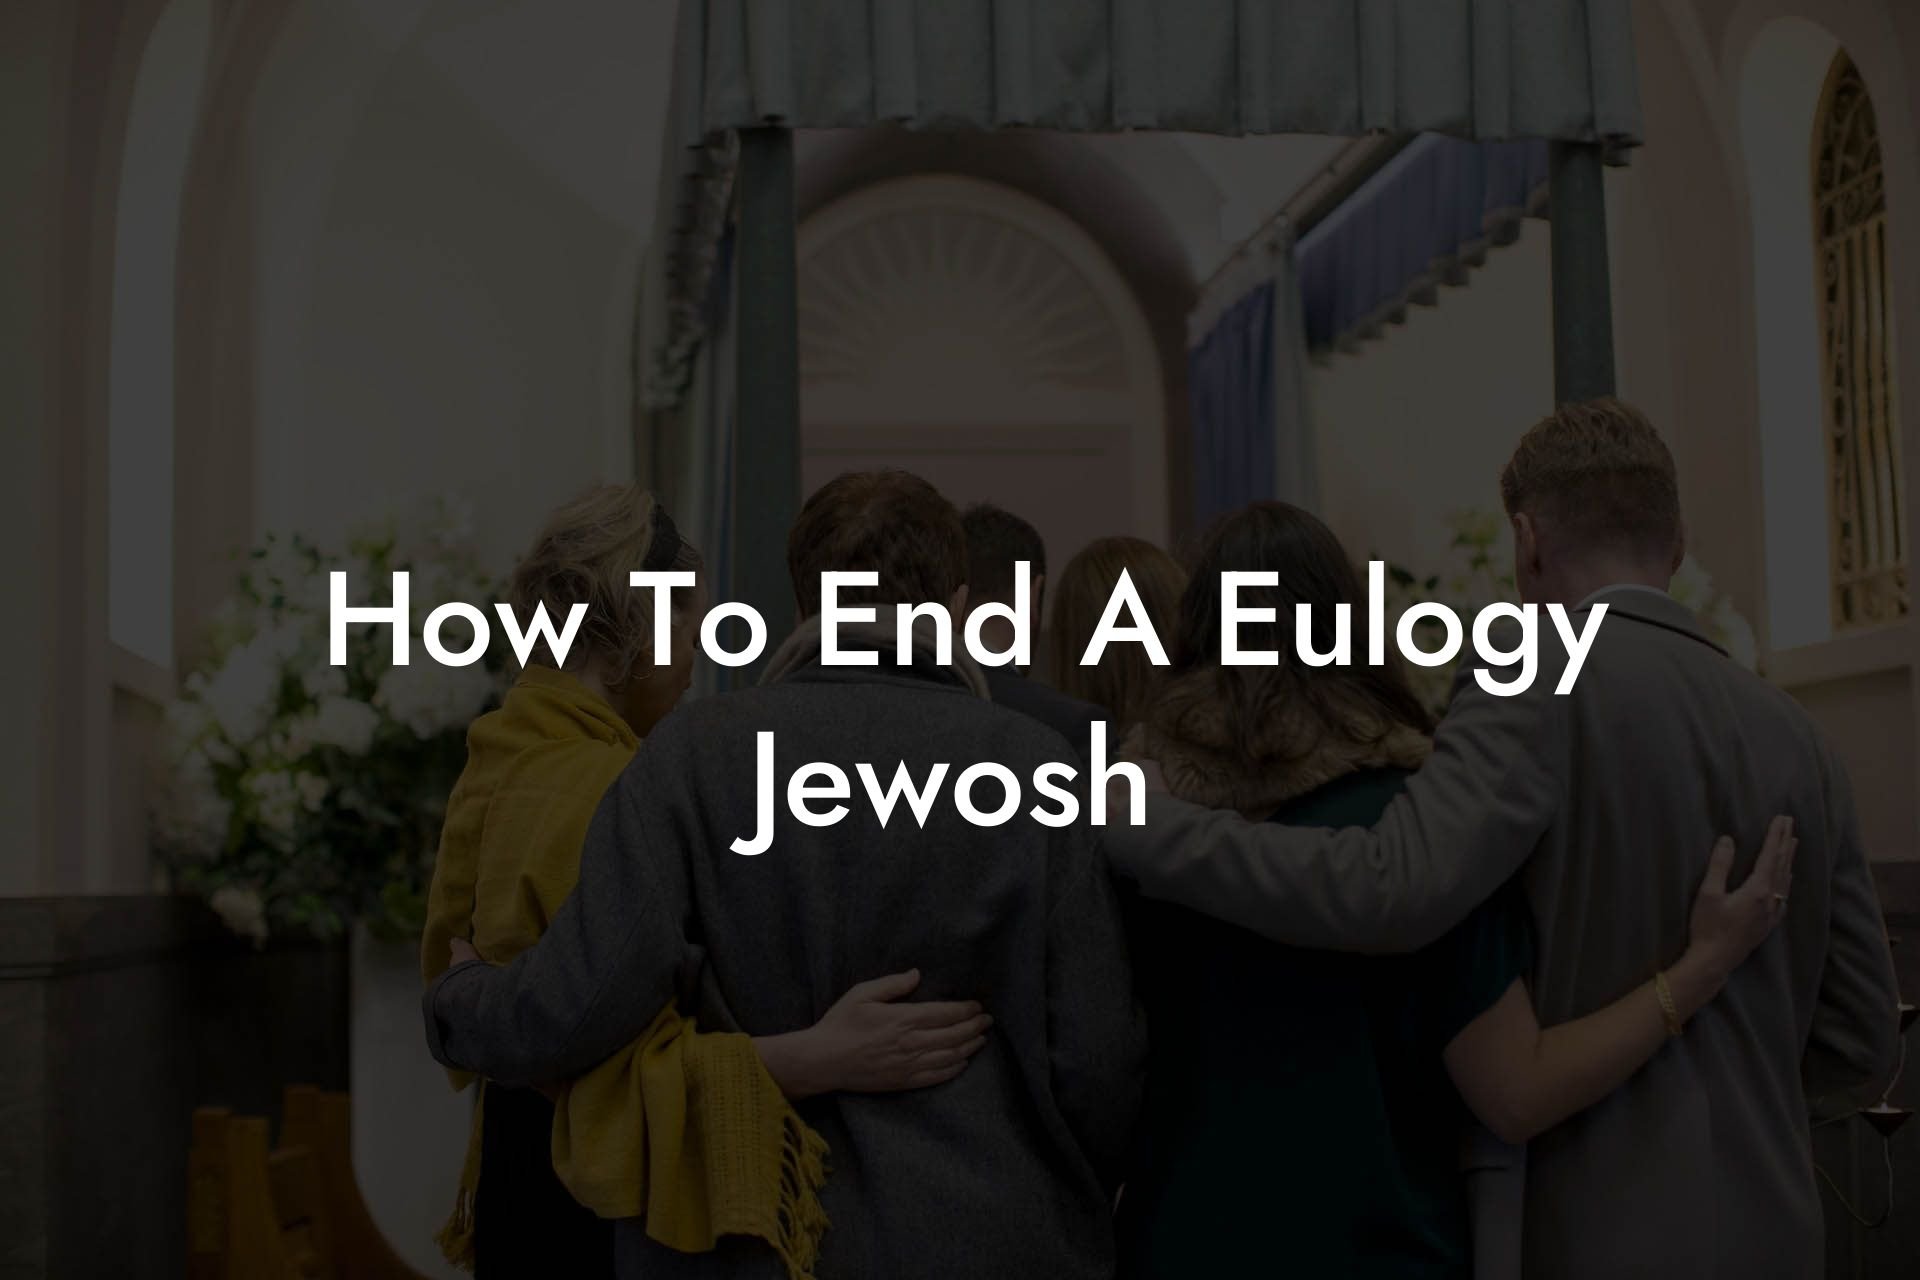 How To End A Eulogy Jewosh